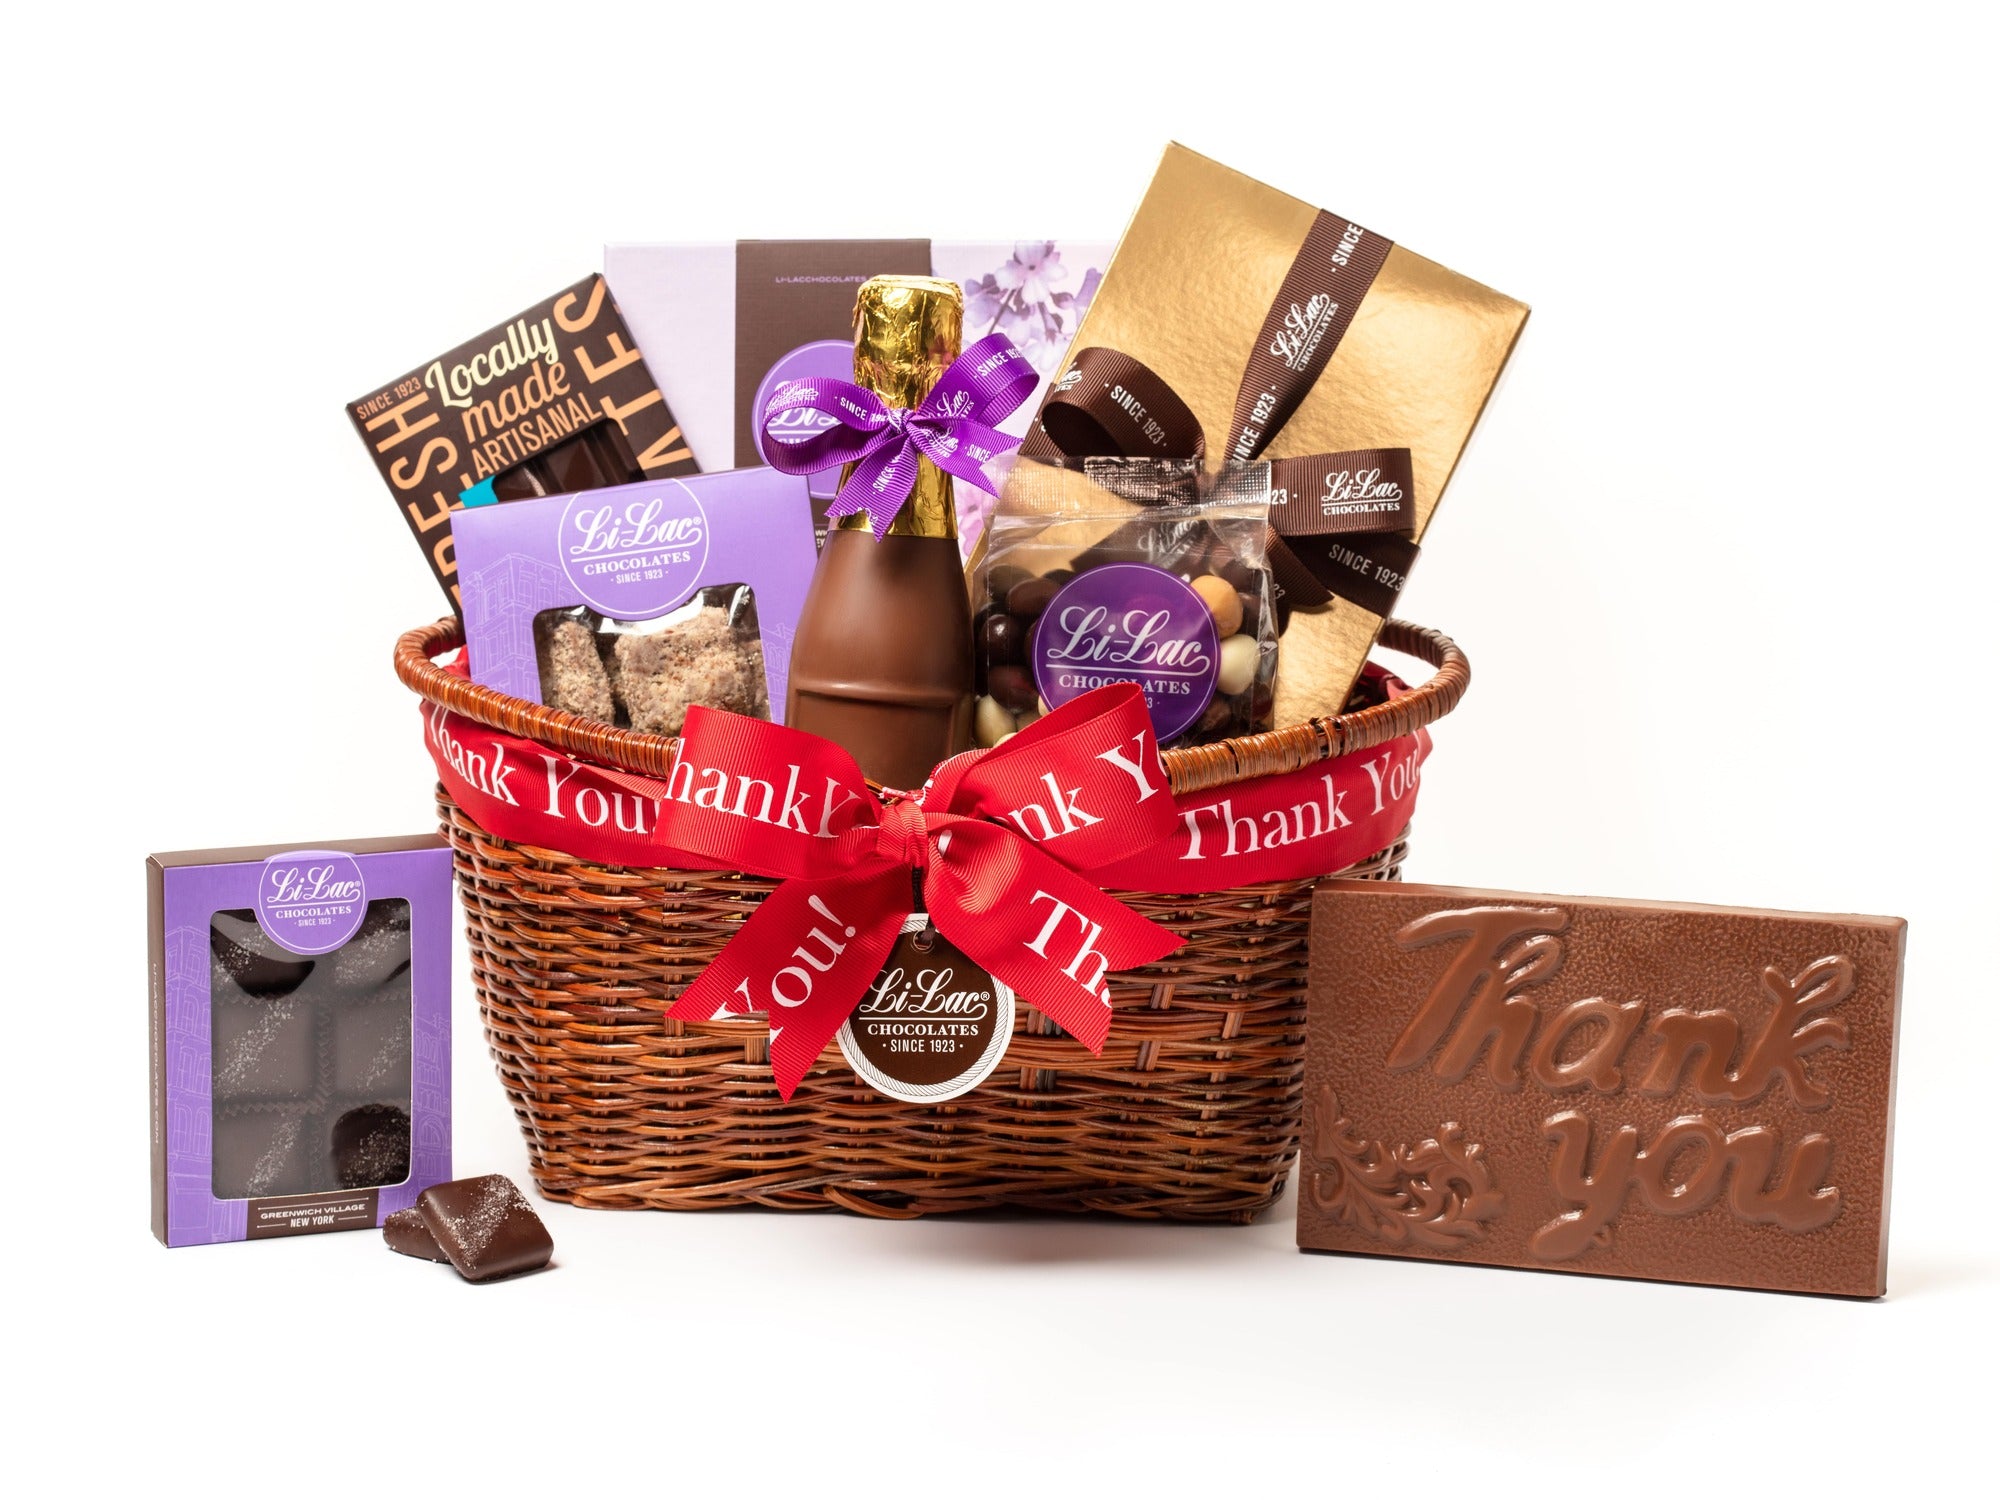 A low, oval wicker basket is tied with a red thank you ribbon. The basket holds one home assortment chocolate box, butter crunch in a purple window box, one boxed chocolate bar, a bag of chocolate espresso beans, a thank you bar in a gold box with a brown ribbon, salted caramels in a purple window box, a 7” chocolate champagne bottle.